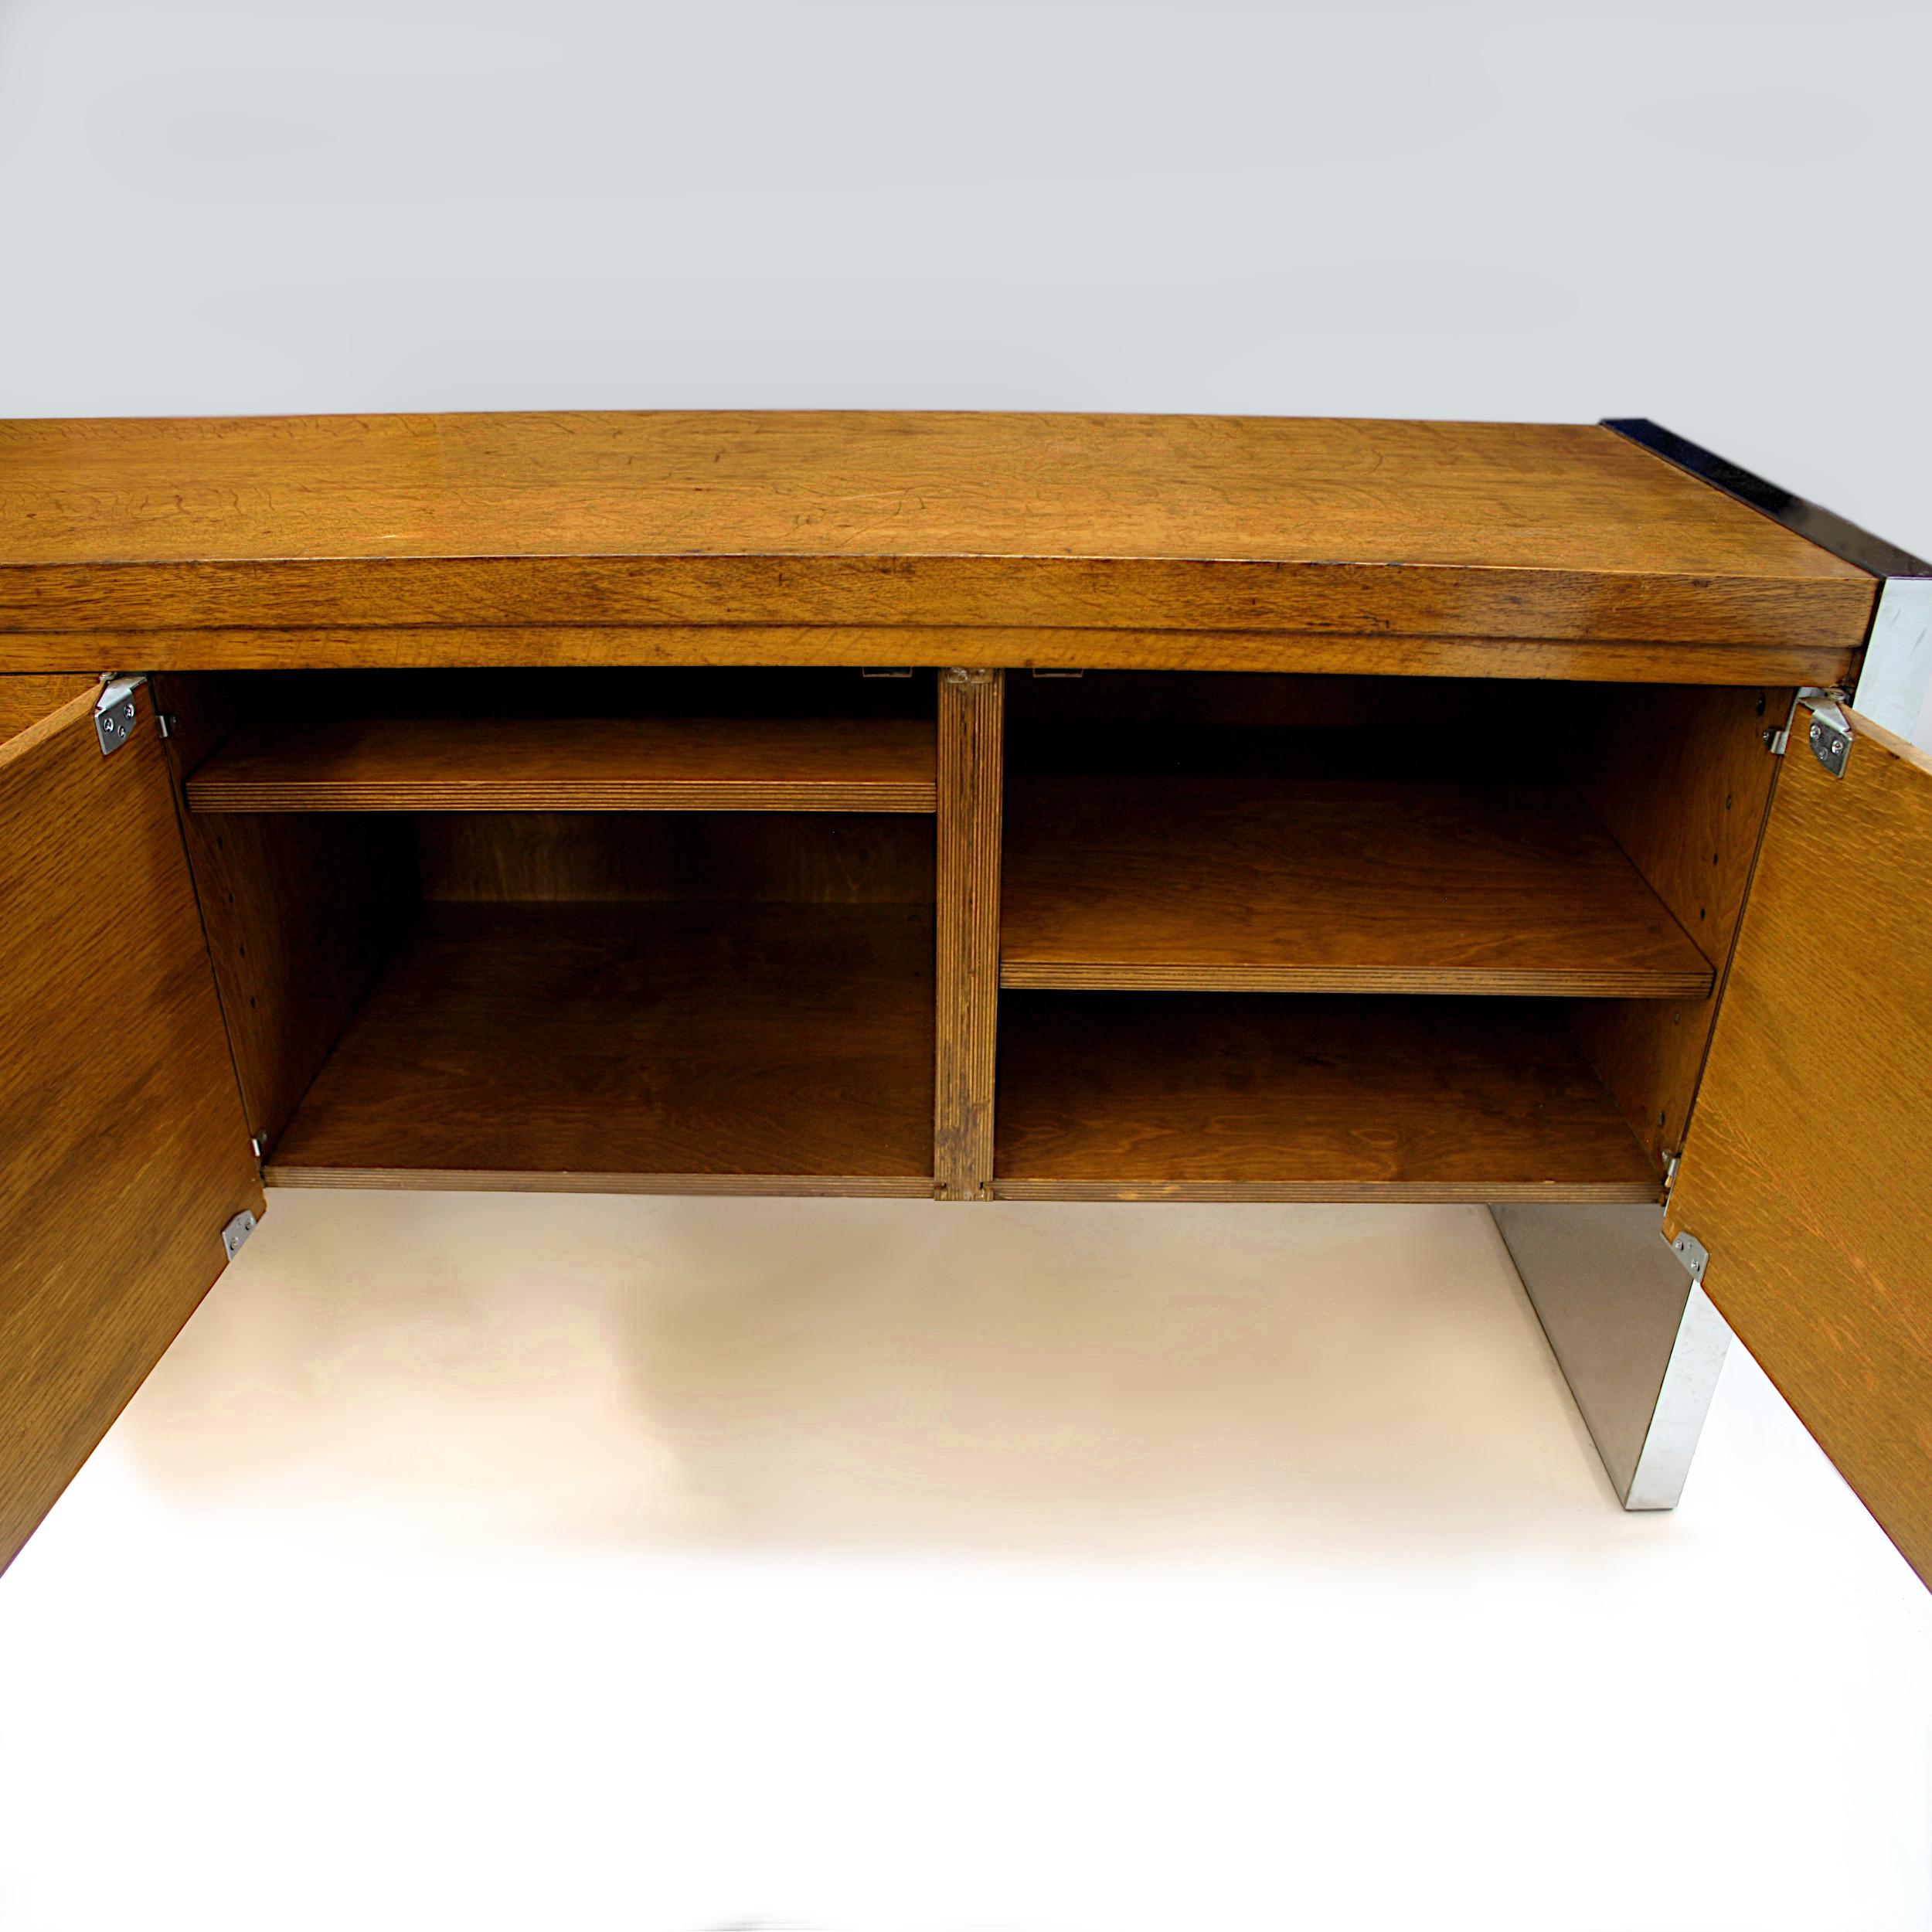 Late 20th Century Vintage Mid-Century Modern Oak & Chrome Credenza by Roger Sprunger for Dunbar 